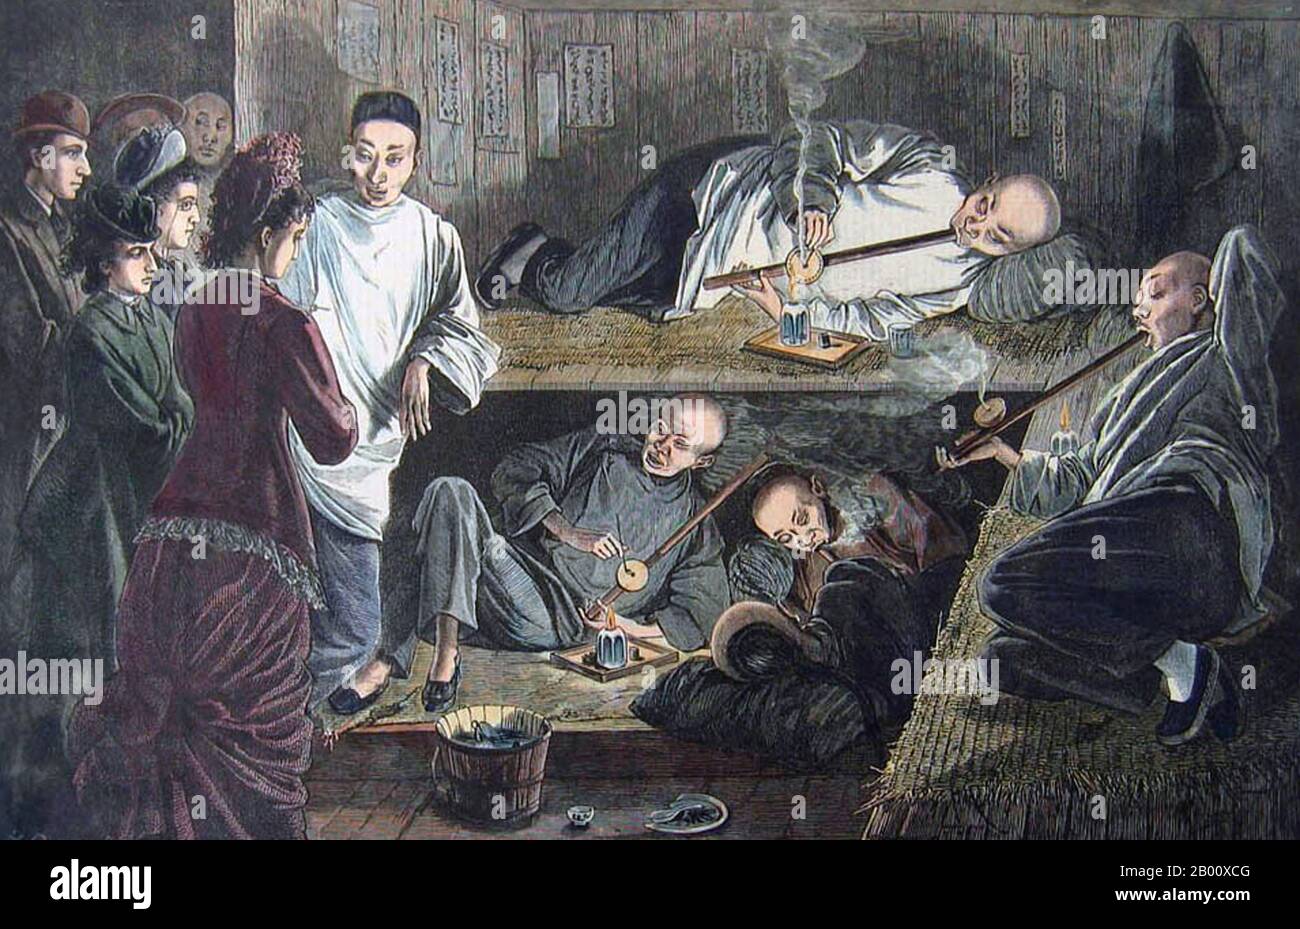 USA: A visit to an opium den, Kearney Street, San Francisco, 1878.  1878 image of people in an opium den in Chinatown, San Francisco. Hand-coloured engraved image titled: 'California - An Evening in the Chinese Quarter of San Francisco - The Chinaman's Paradise, A Favorite Haunt of Opium-Smokers on Kearney Street'. Stock Photo